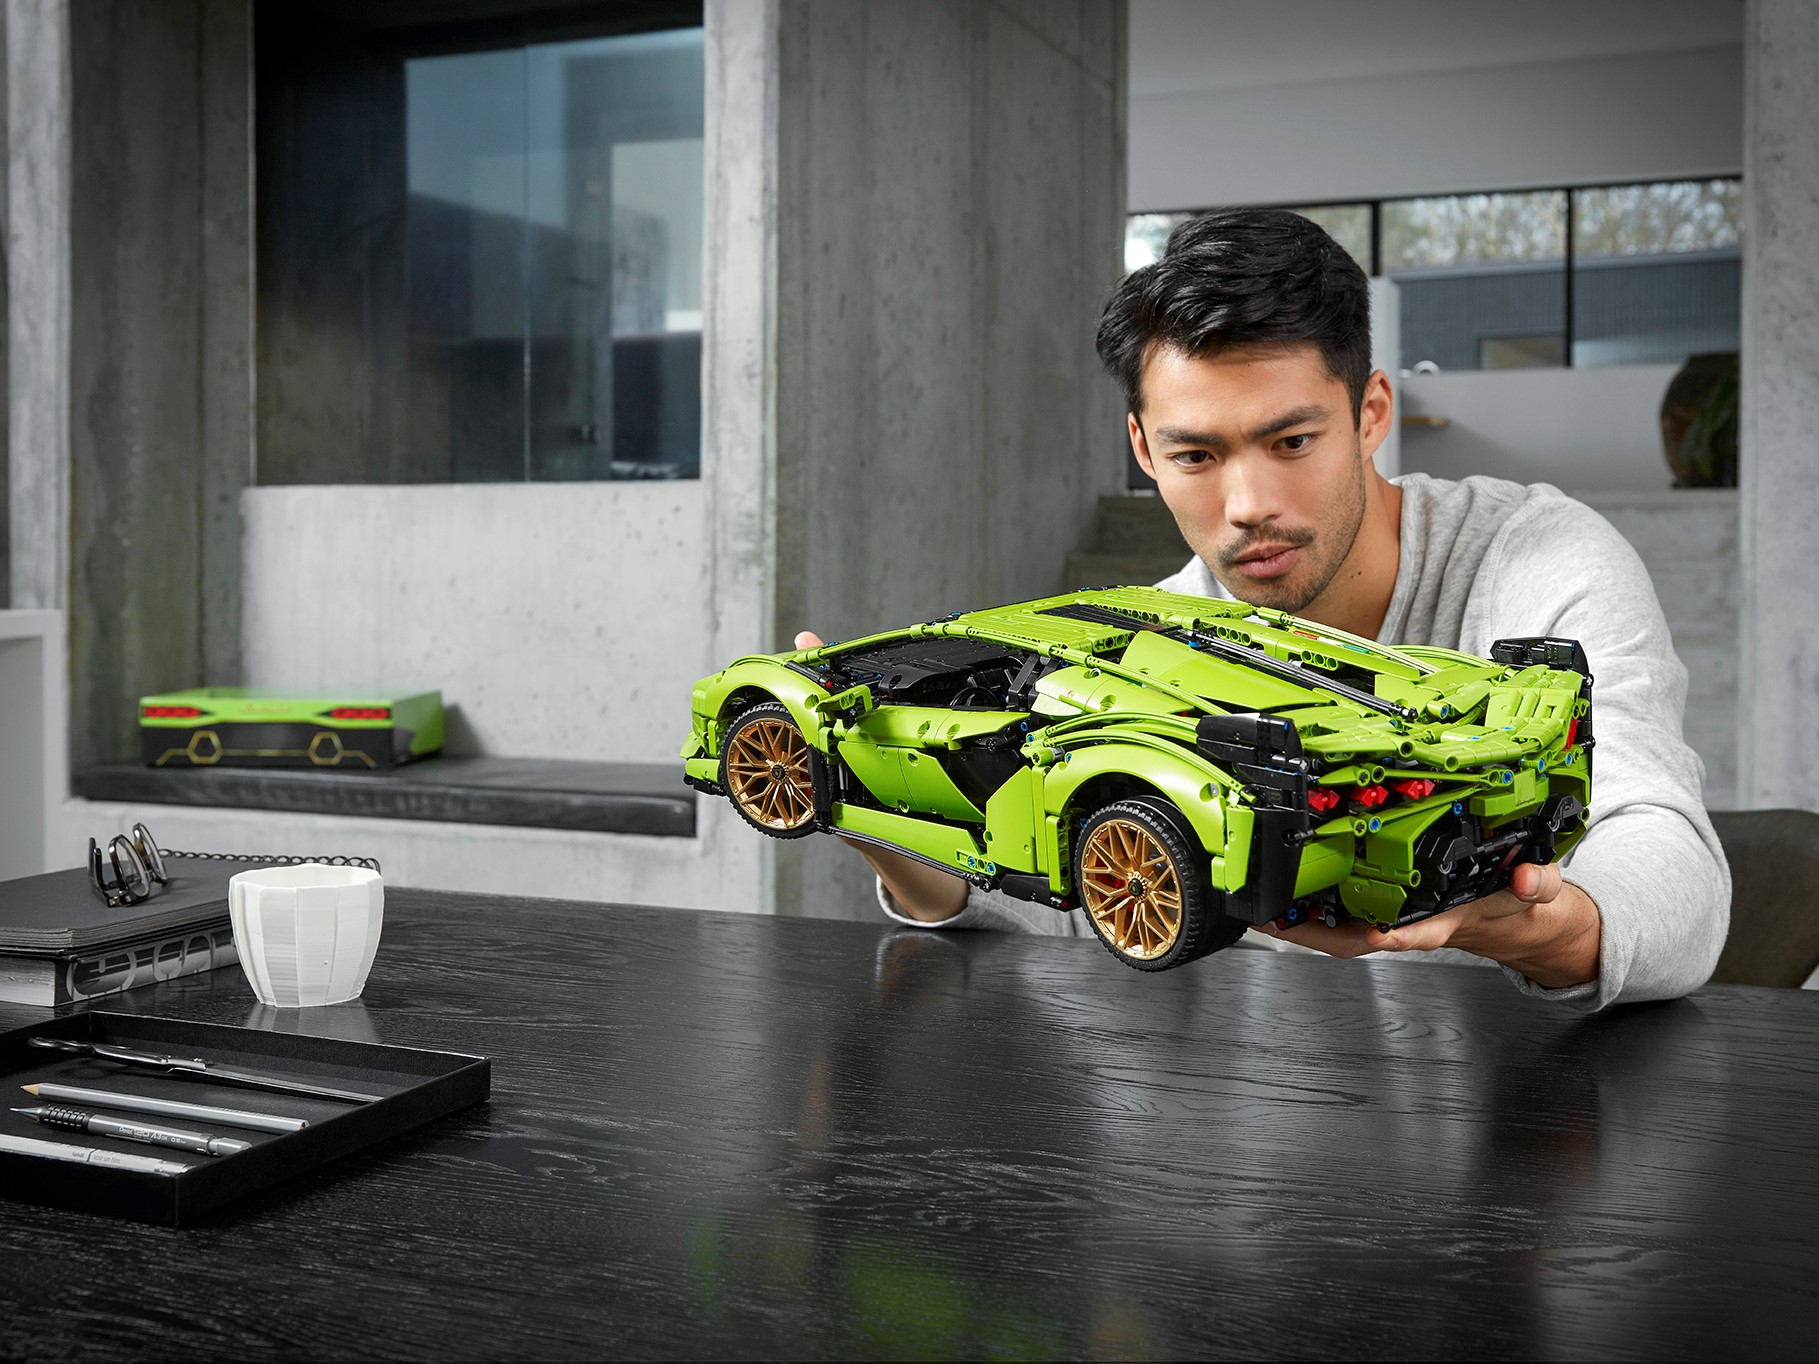 Lego's Lamborghini Sián FKP 37 Is Full Size, Made of 400K Pieces